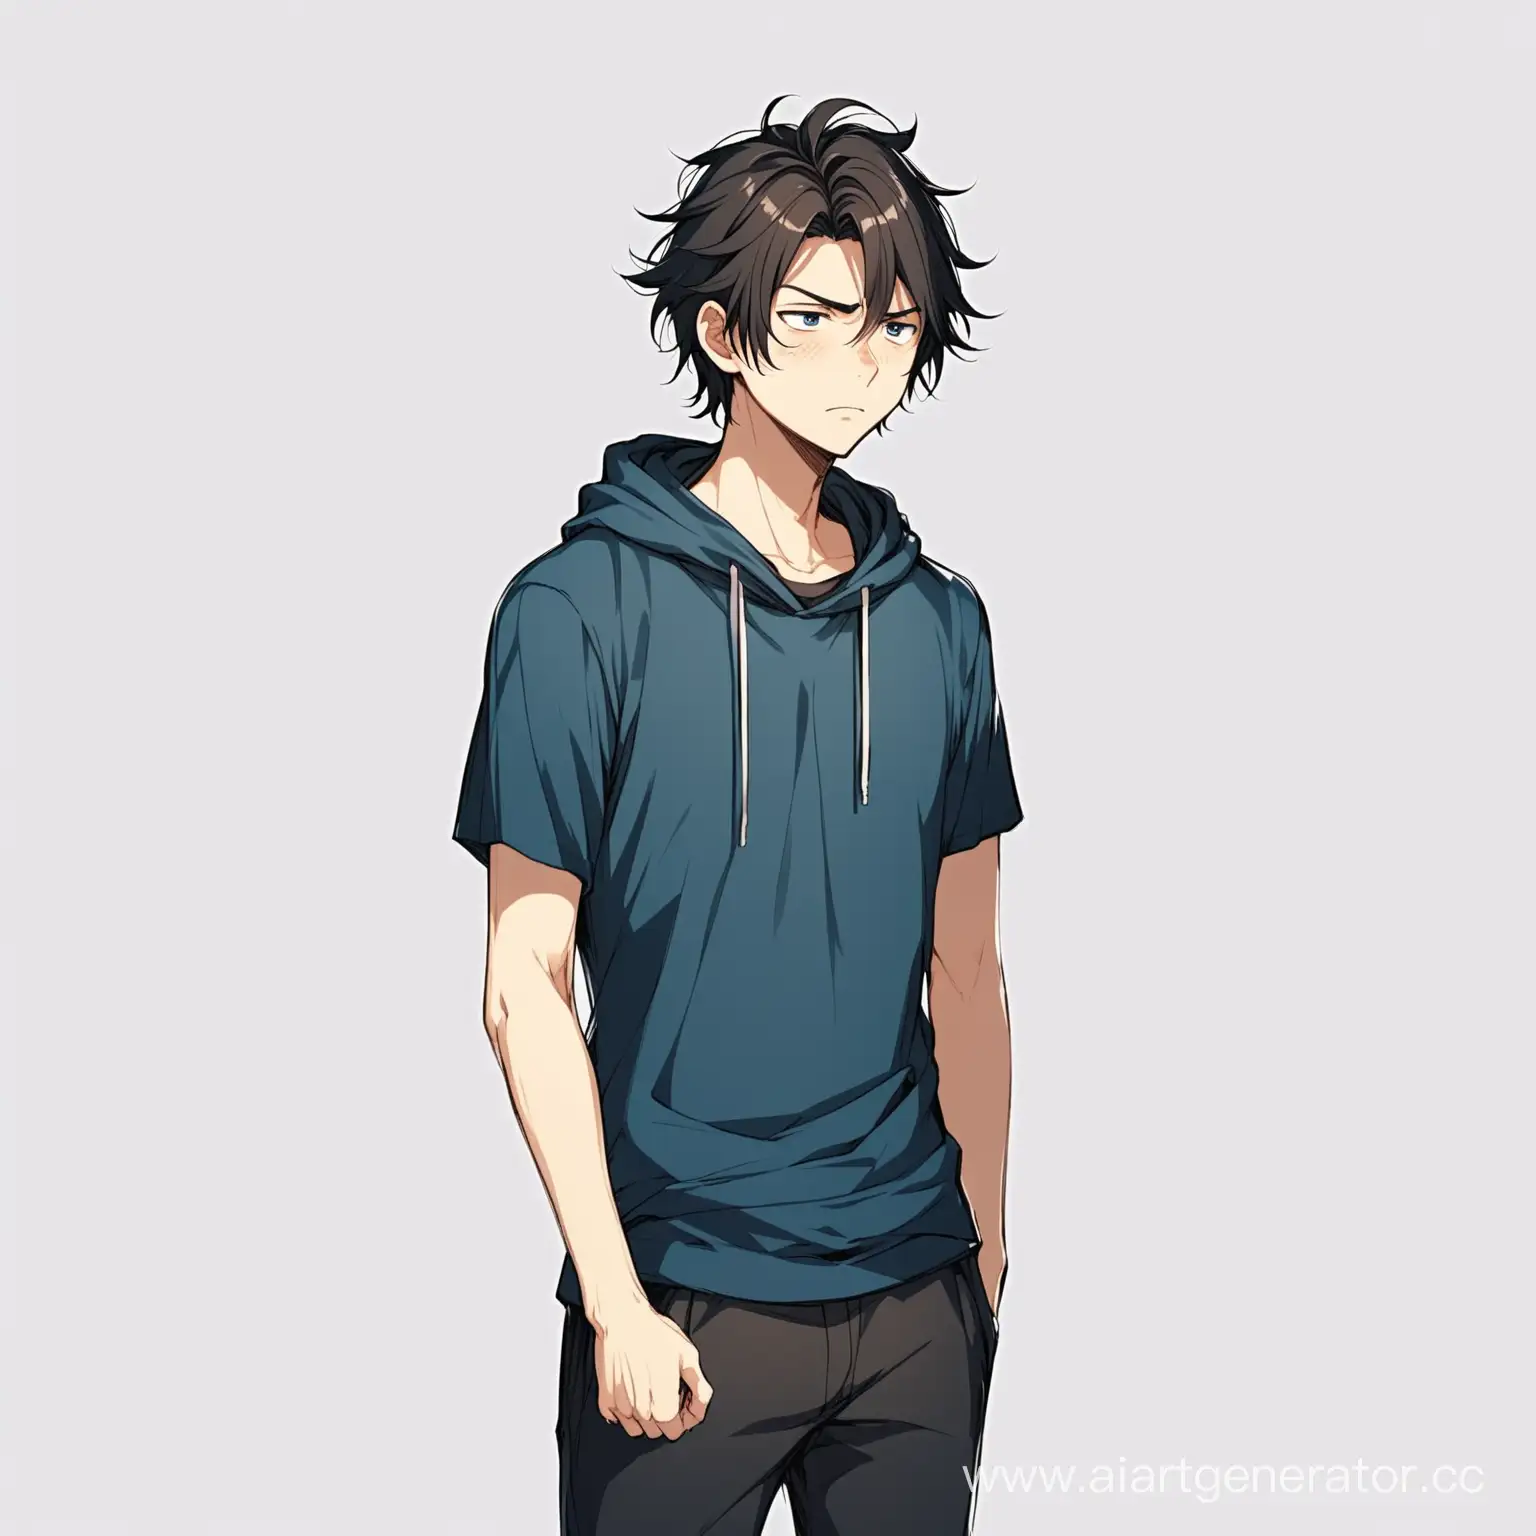 Sleepy-Anime-Character-in-Casual-Attire-on-White-Background